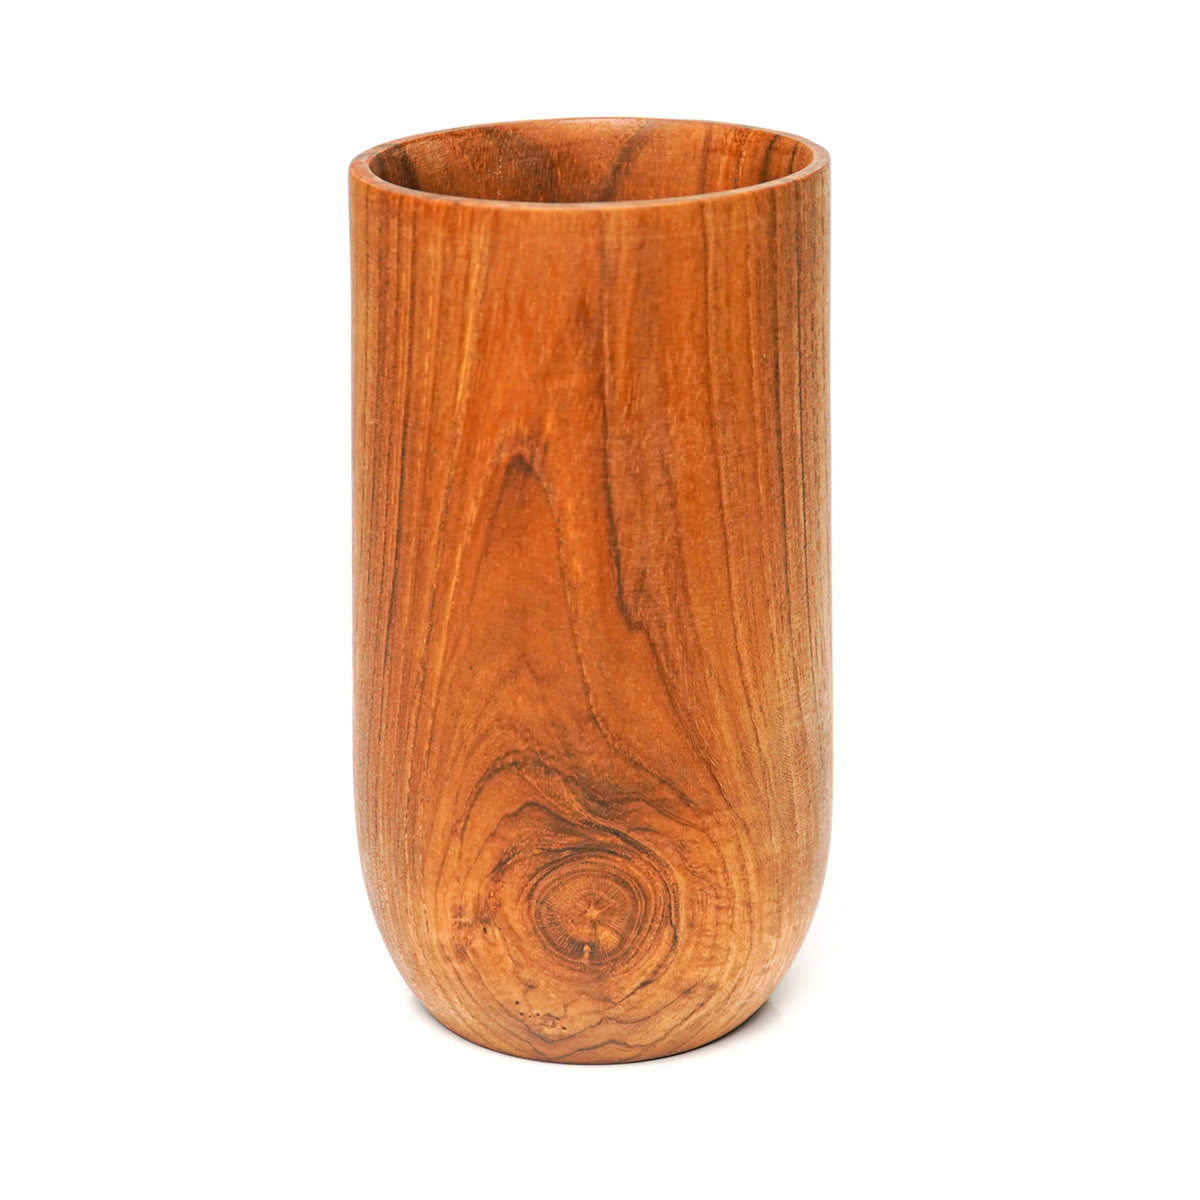 Rainforest Bowls Set of 4 Javanese Teak Wood Drinking Cup- 250ml (8.5 oz)-  Great for Daily Use, Hot …See more Rainforest Bowls Set of 4 Javanese Teak